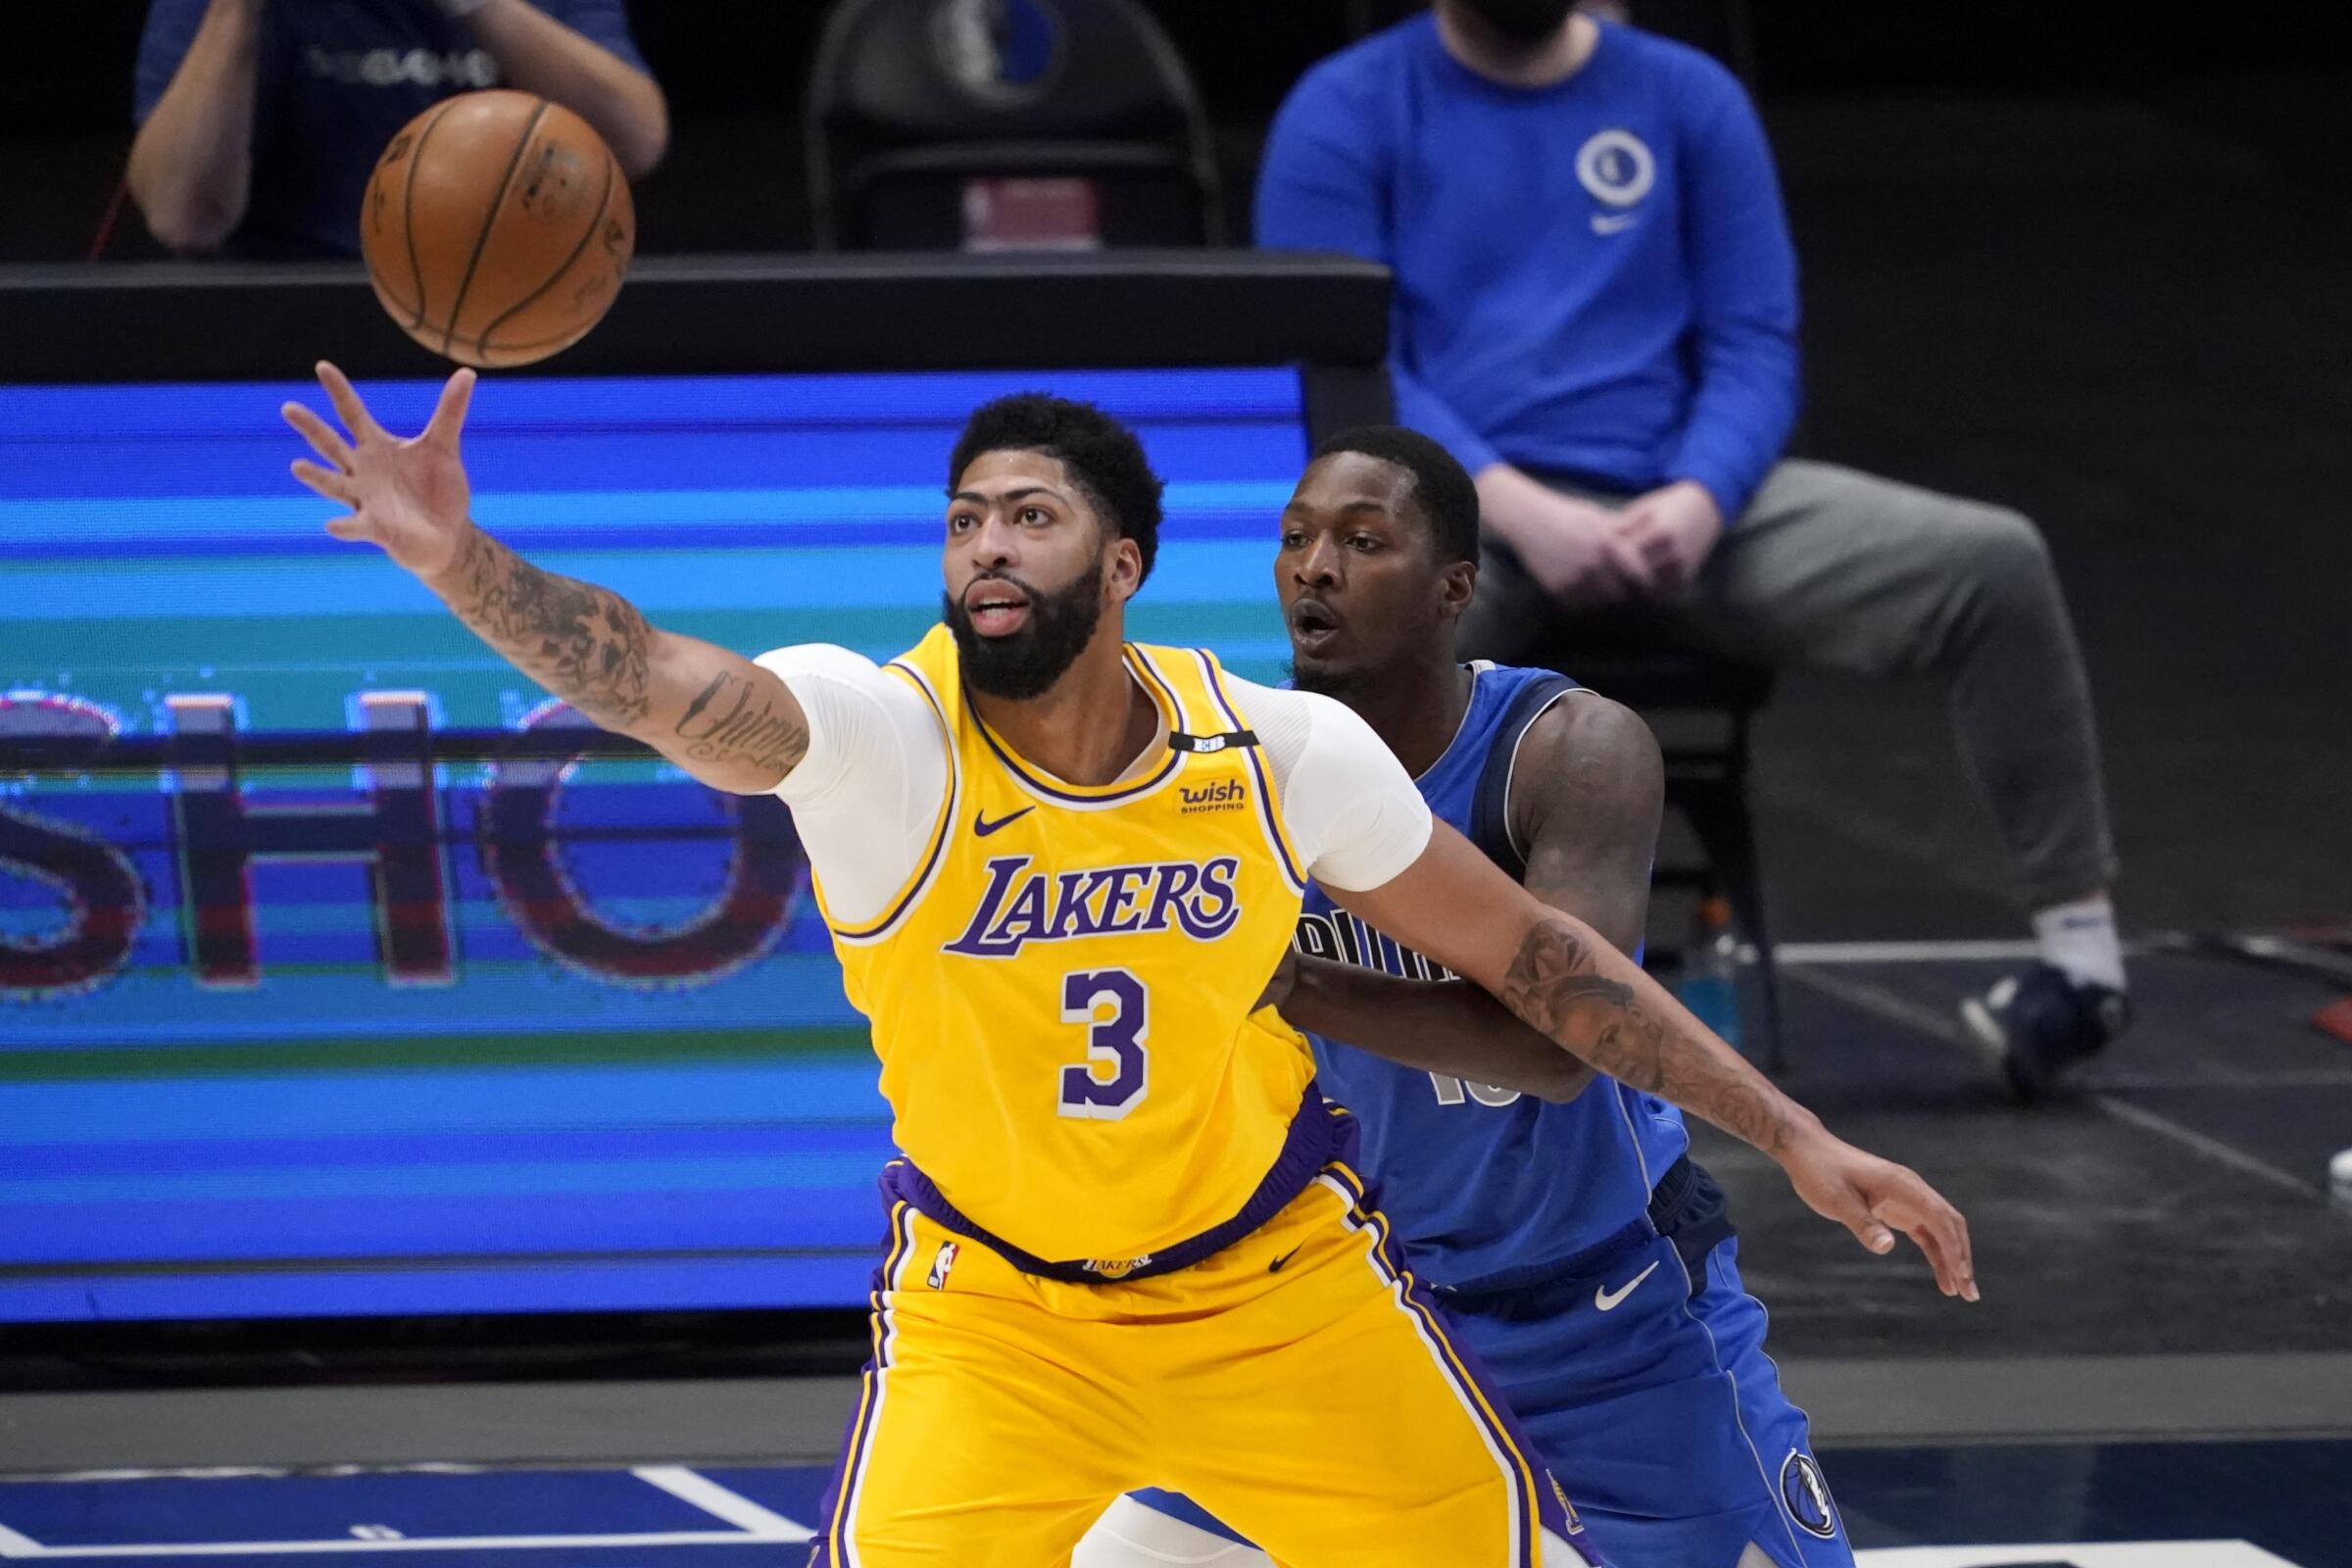 Lakers forward Anthony Davis reaches out for a pass in front of Dallas Mavericks forward Dorian Finney-Smith.